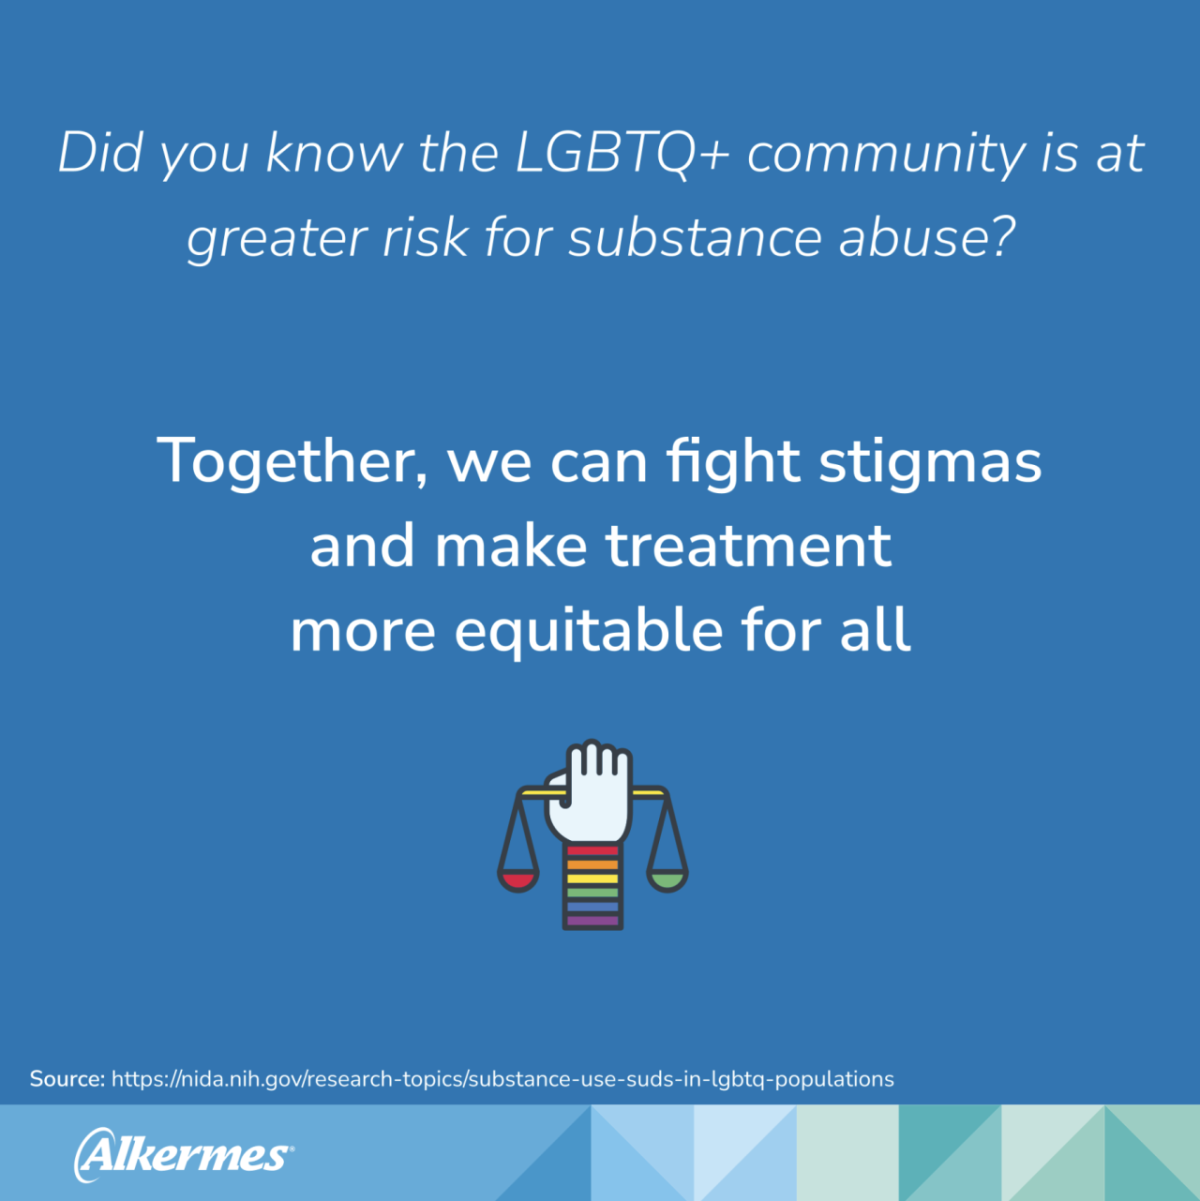 PDF slide with the text "Did you know the LGBTQ+ community is at greater risk for substance abuse? Together, we can fight stigmas and make treatment more equitable for all" Source: https://nida.nih.gov/research-topics/substance-use-suds-in-lgbtq-populations